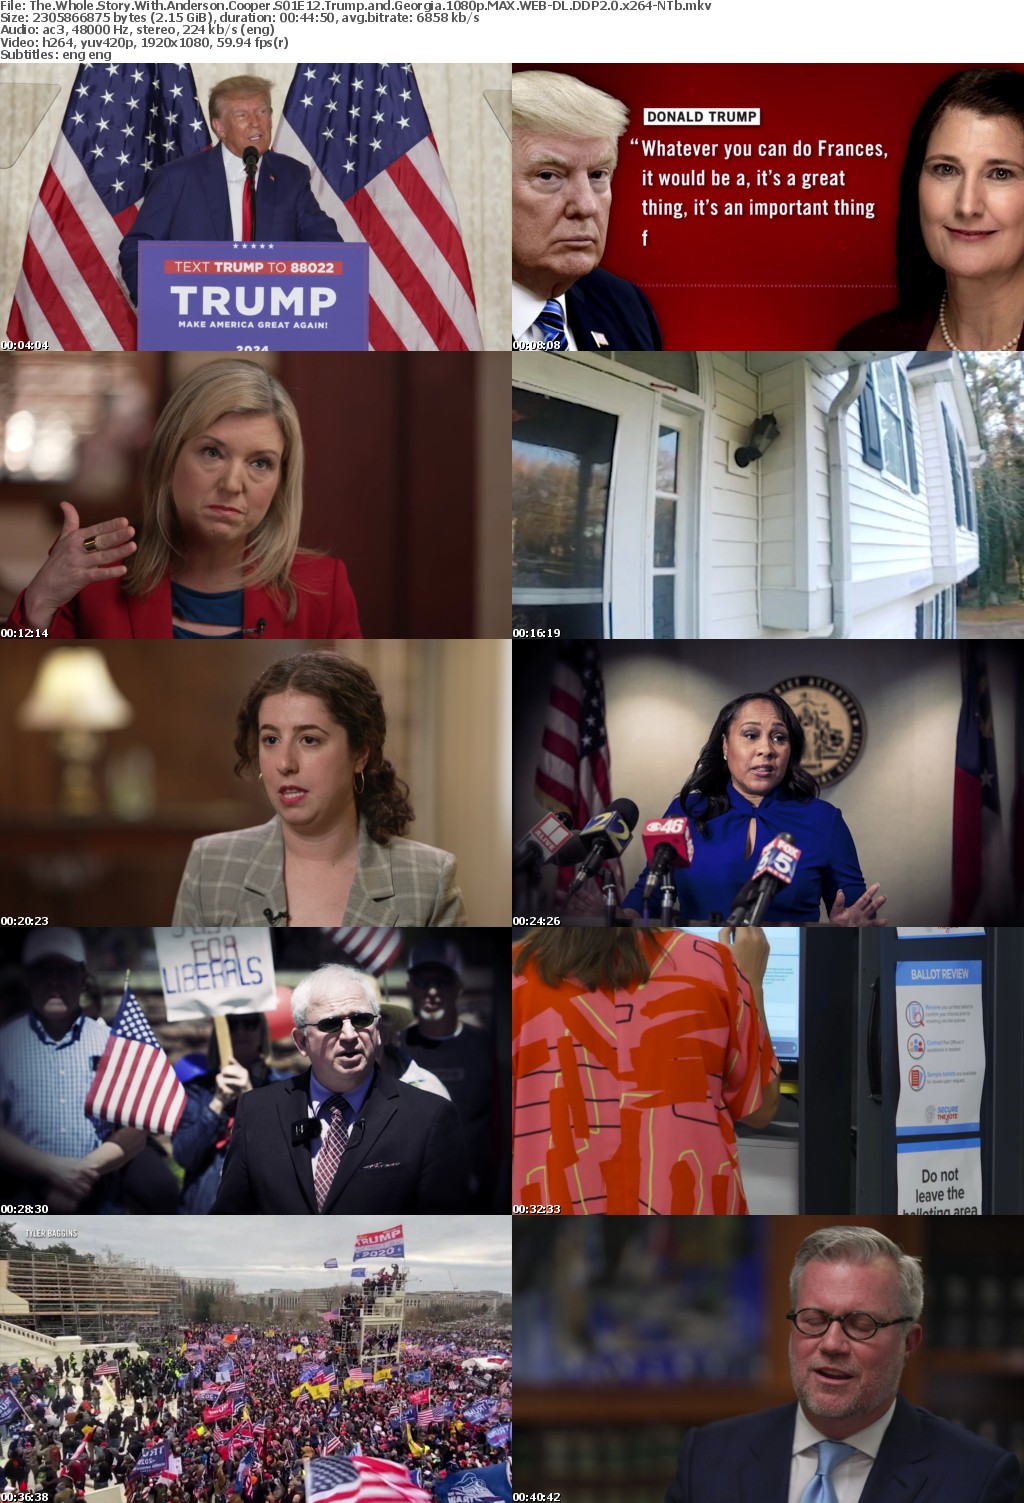 The Whole Story With Anderson Cooper S01E12 Trump and Georgia 1080p MAX WEB-DL DDP2 0 x264-NTb